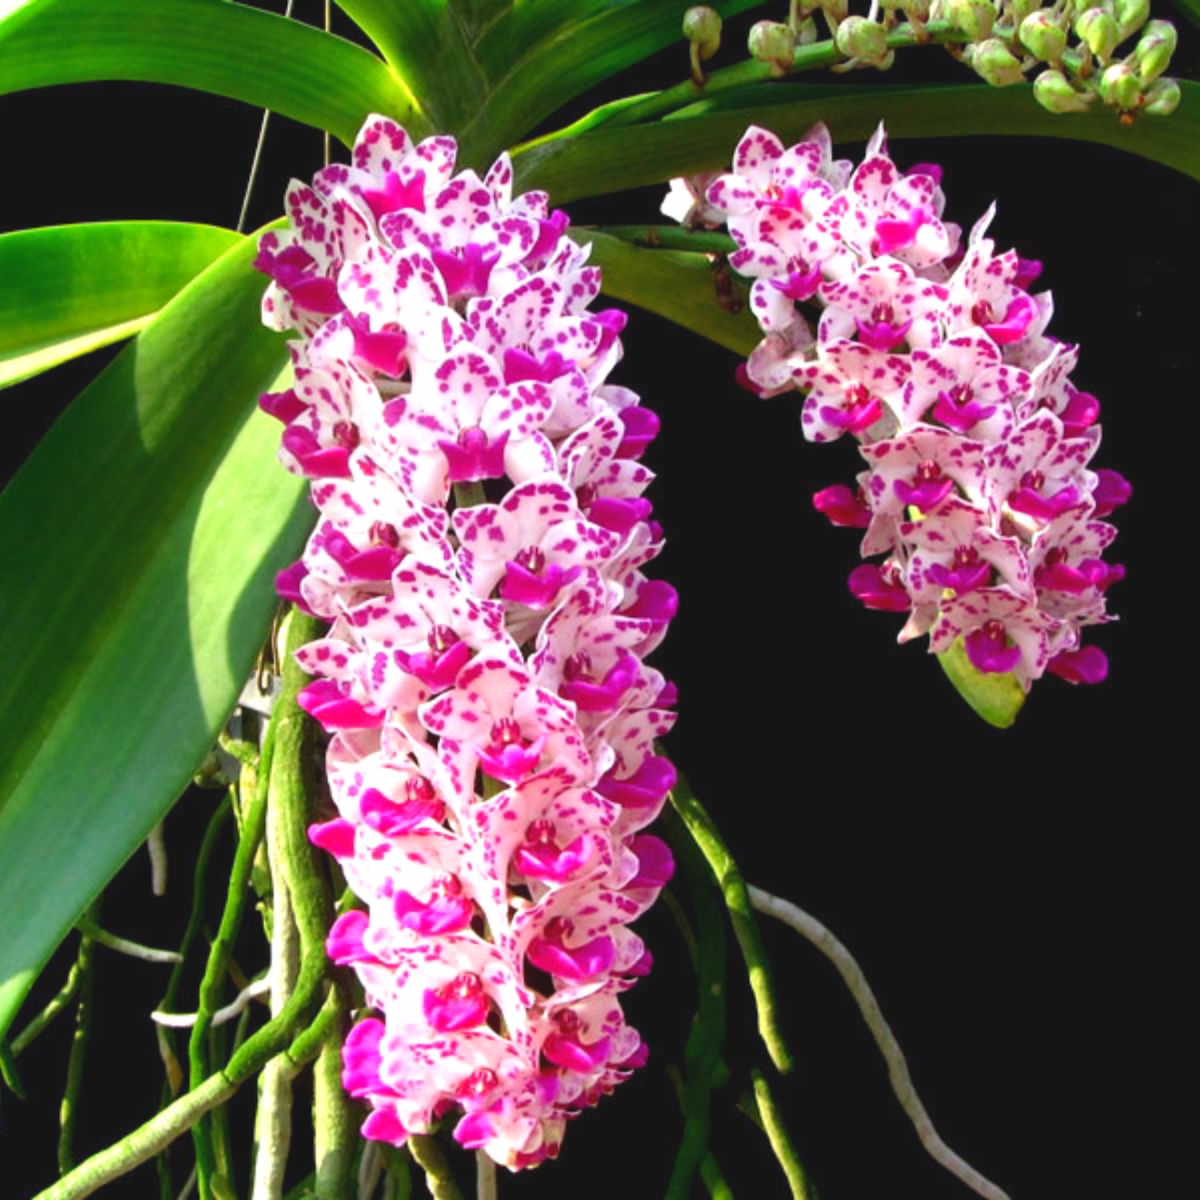 Rhynchostylis Gigantea 'Spotted' orchid in full bloom, showcasing its beautiful spotted petals